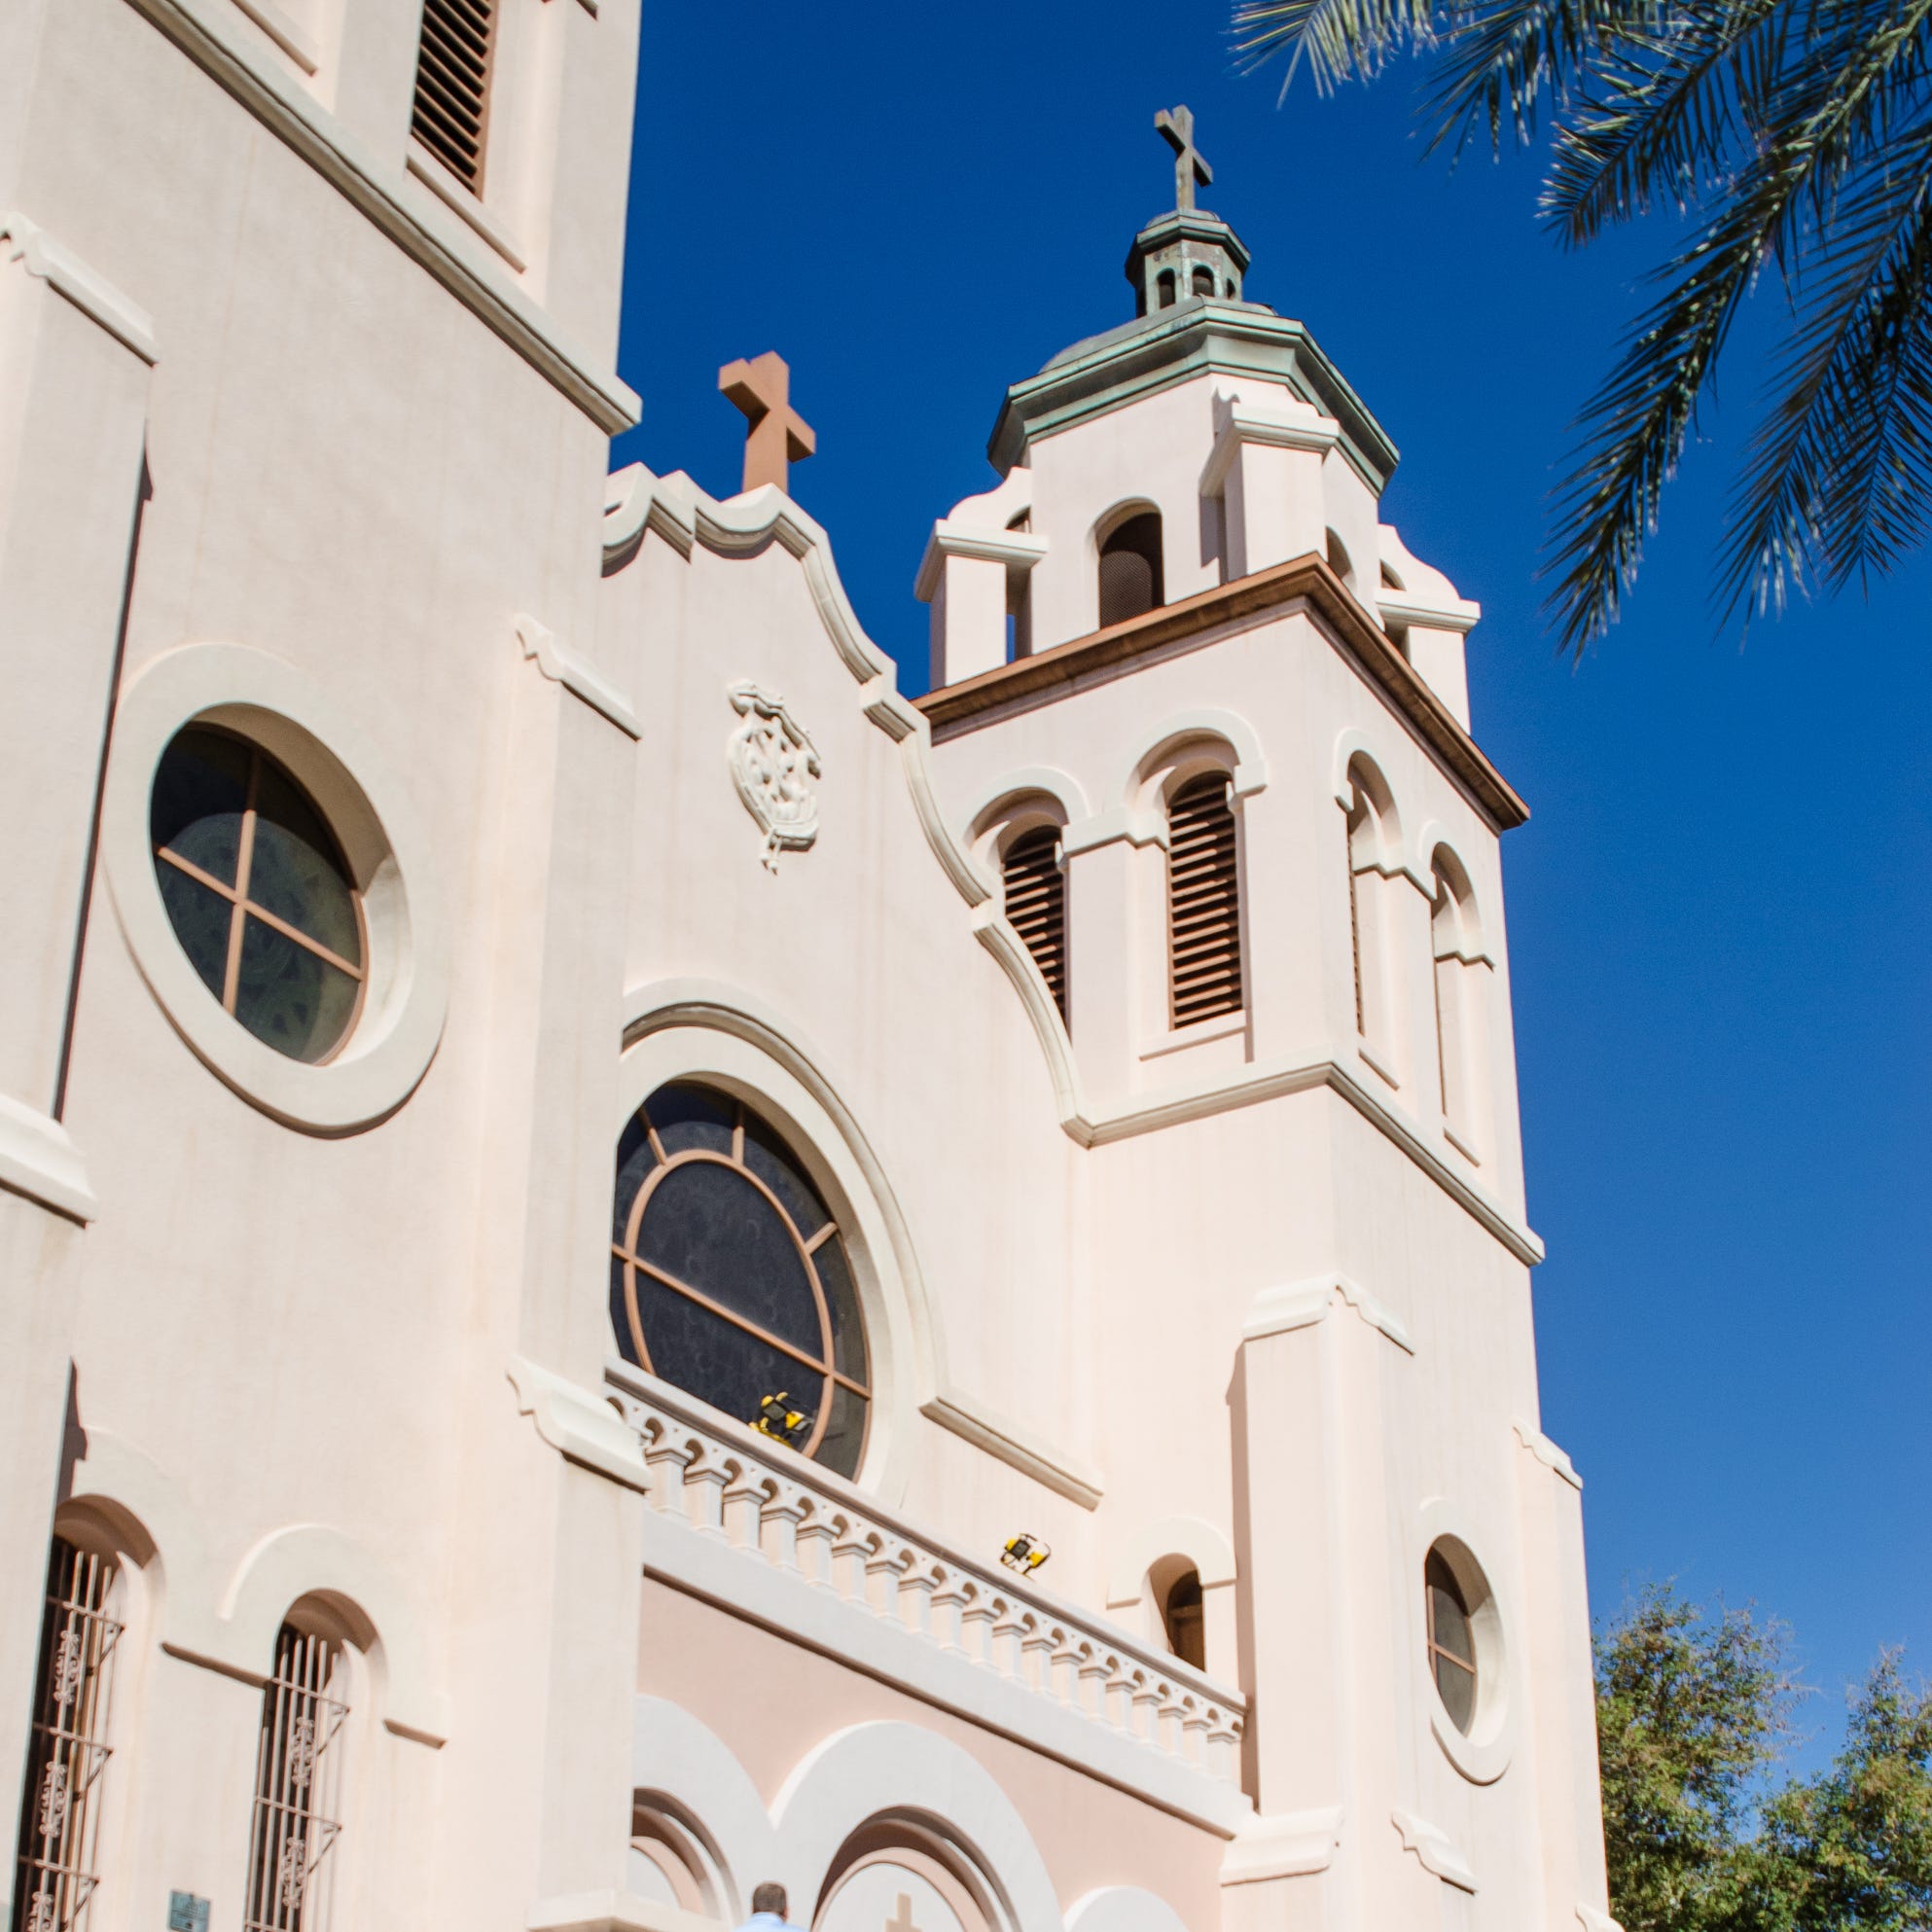 No. 43: Roman Catholic Diocese of Phoenix | Churches, schools, missions | 2019 employees: 4,316 | 2018 employees: 4,222 | Ownership: Non-profit | Headquarters: Phoenix | www.dphx.org